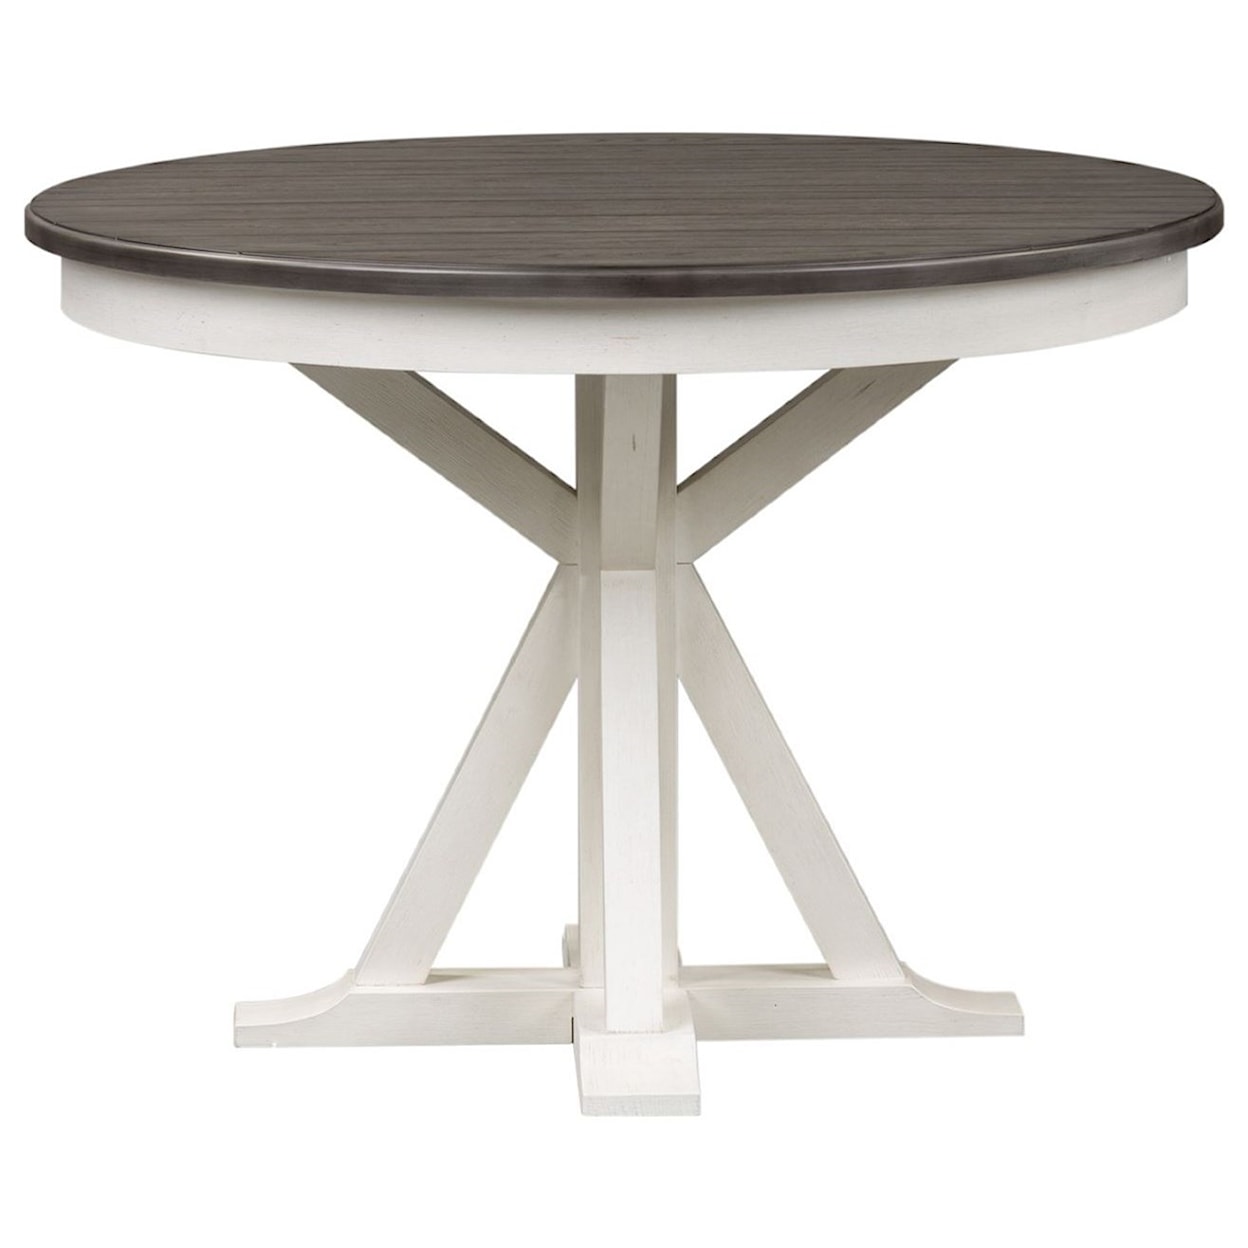 Freedom Furniture Allyson Park Round Dining Room Table 